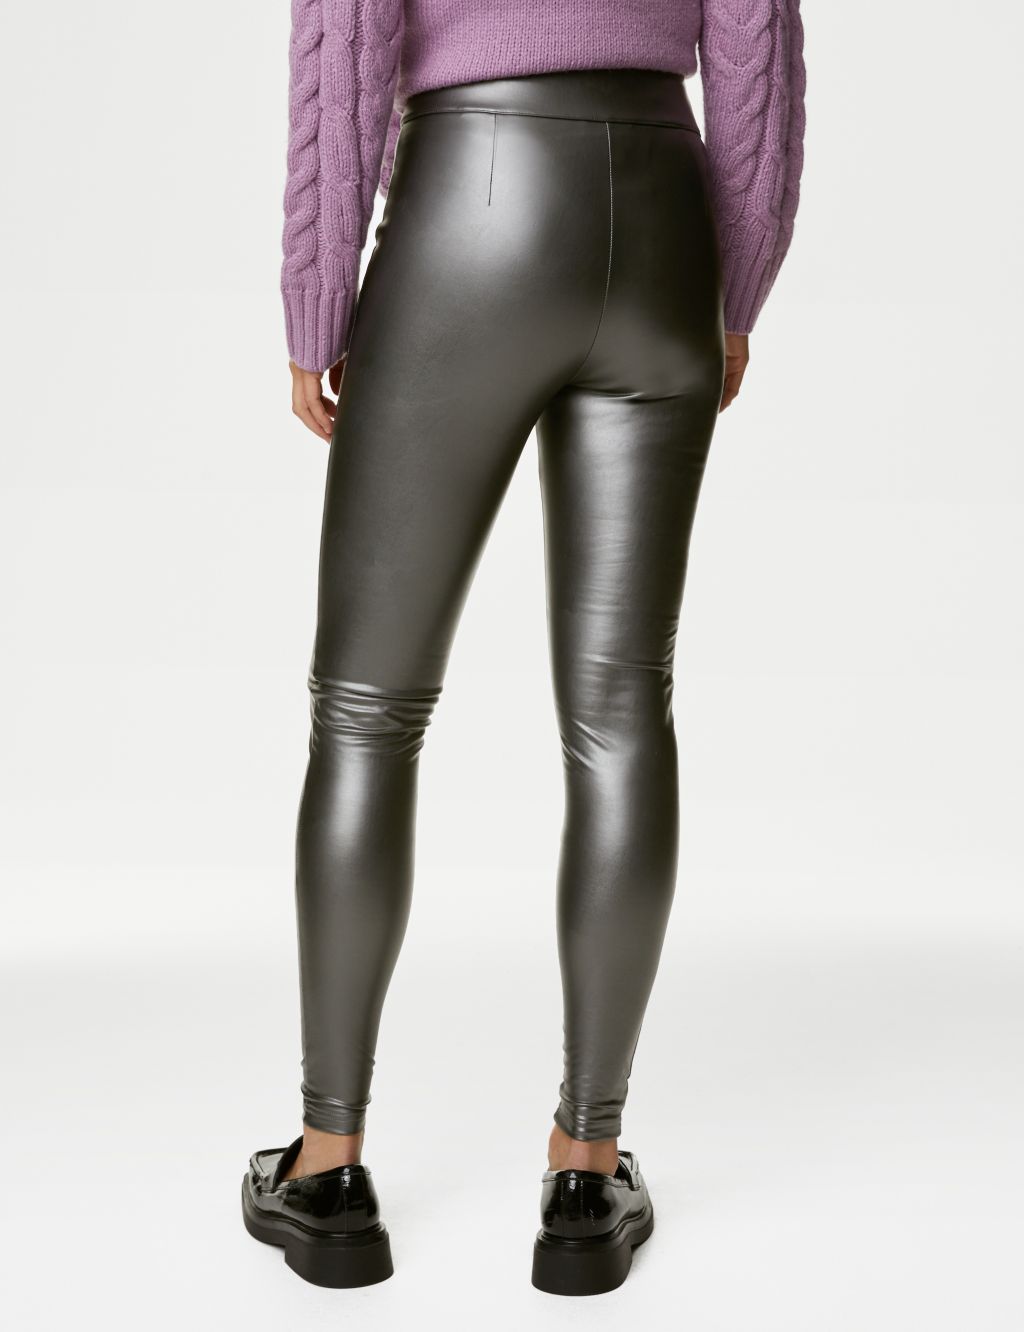 Leather Look High Waisted Leggings image 4